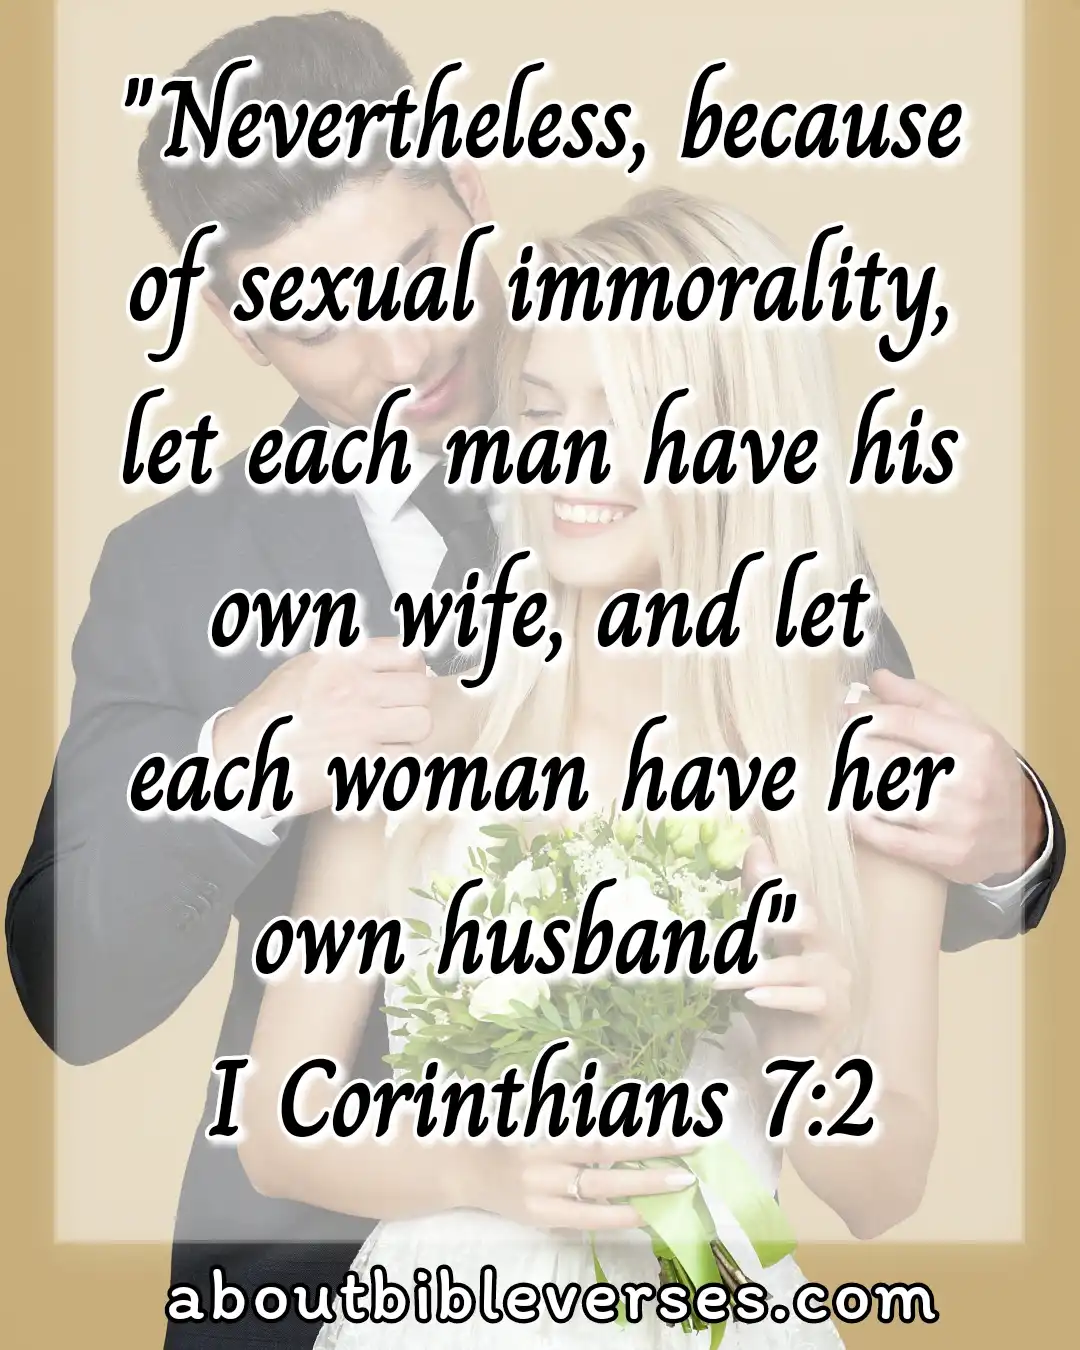 Bible Verses About Being Hurt By Husband (1 Corinthians 7:2)